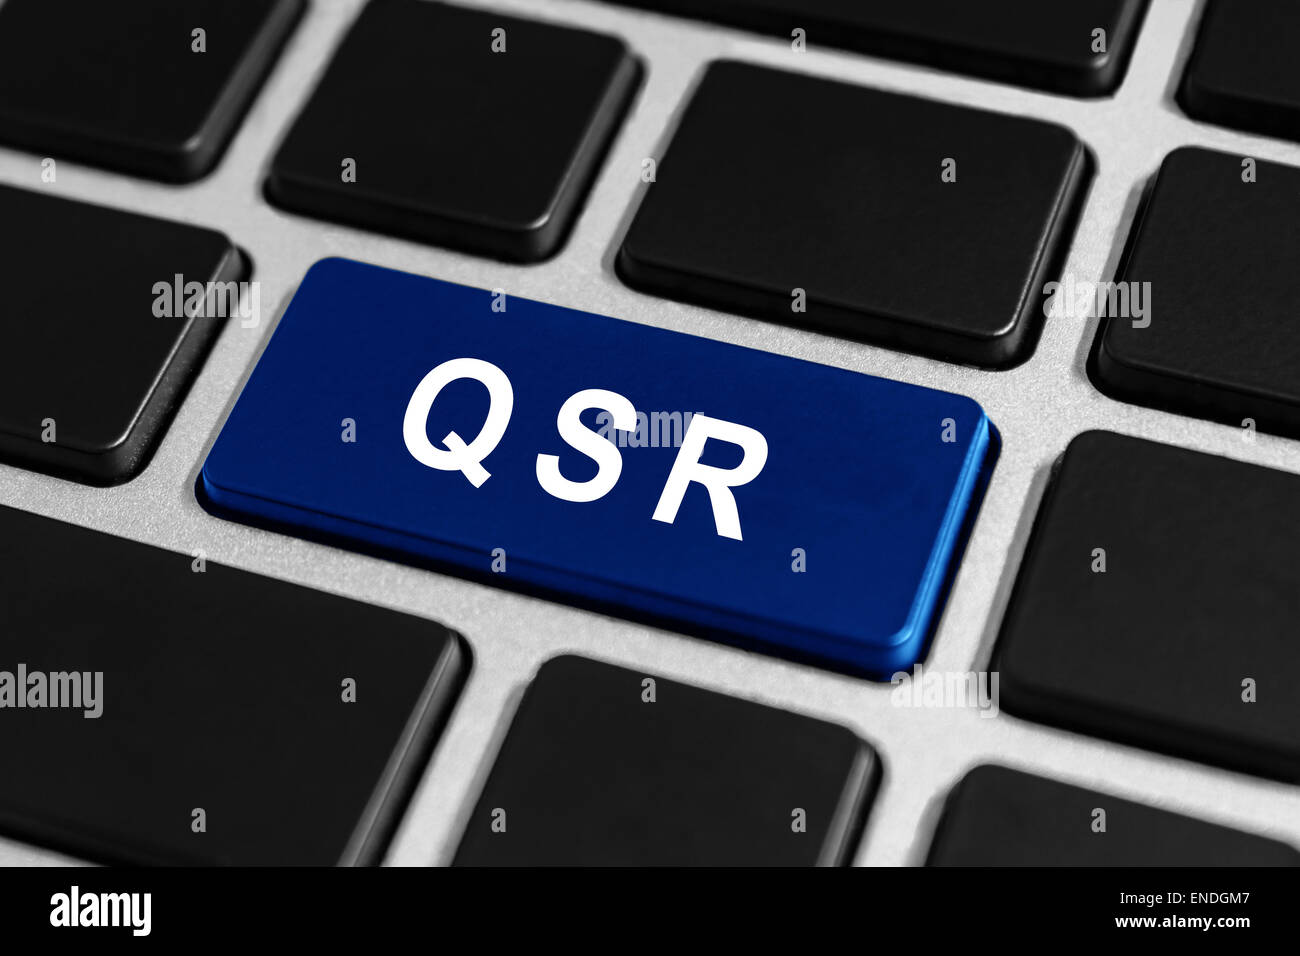 QSR or Quick service restaurants button on keyboard, business concept Stock Photo